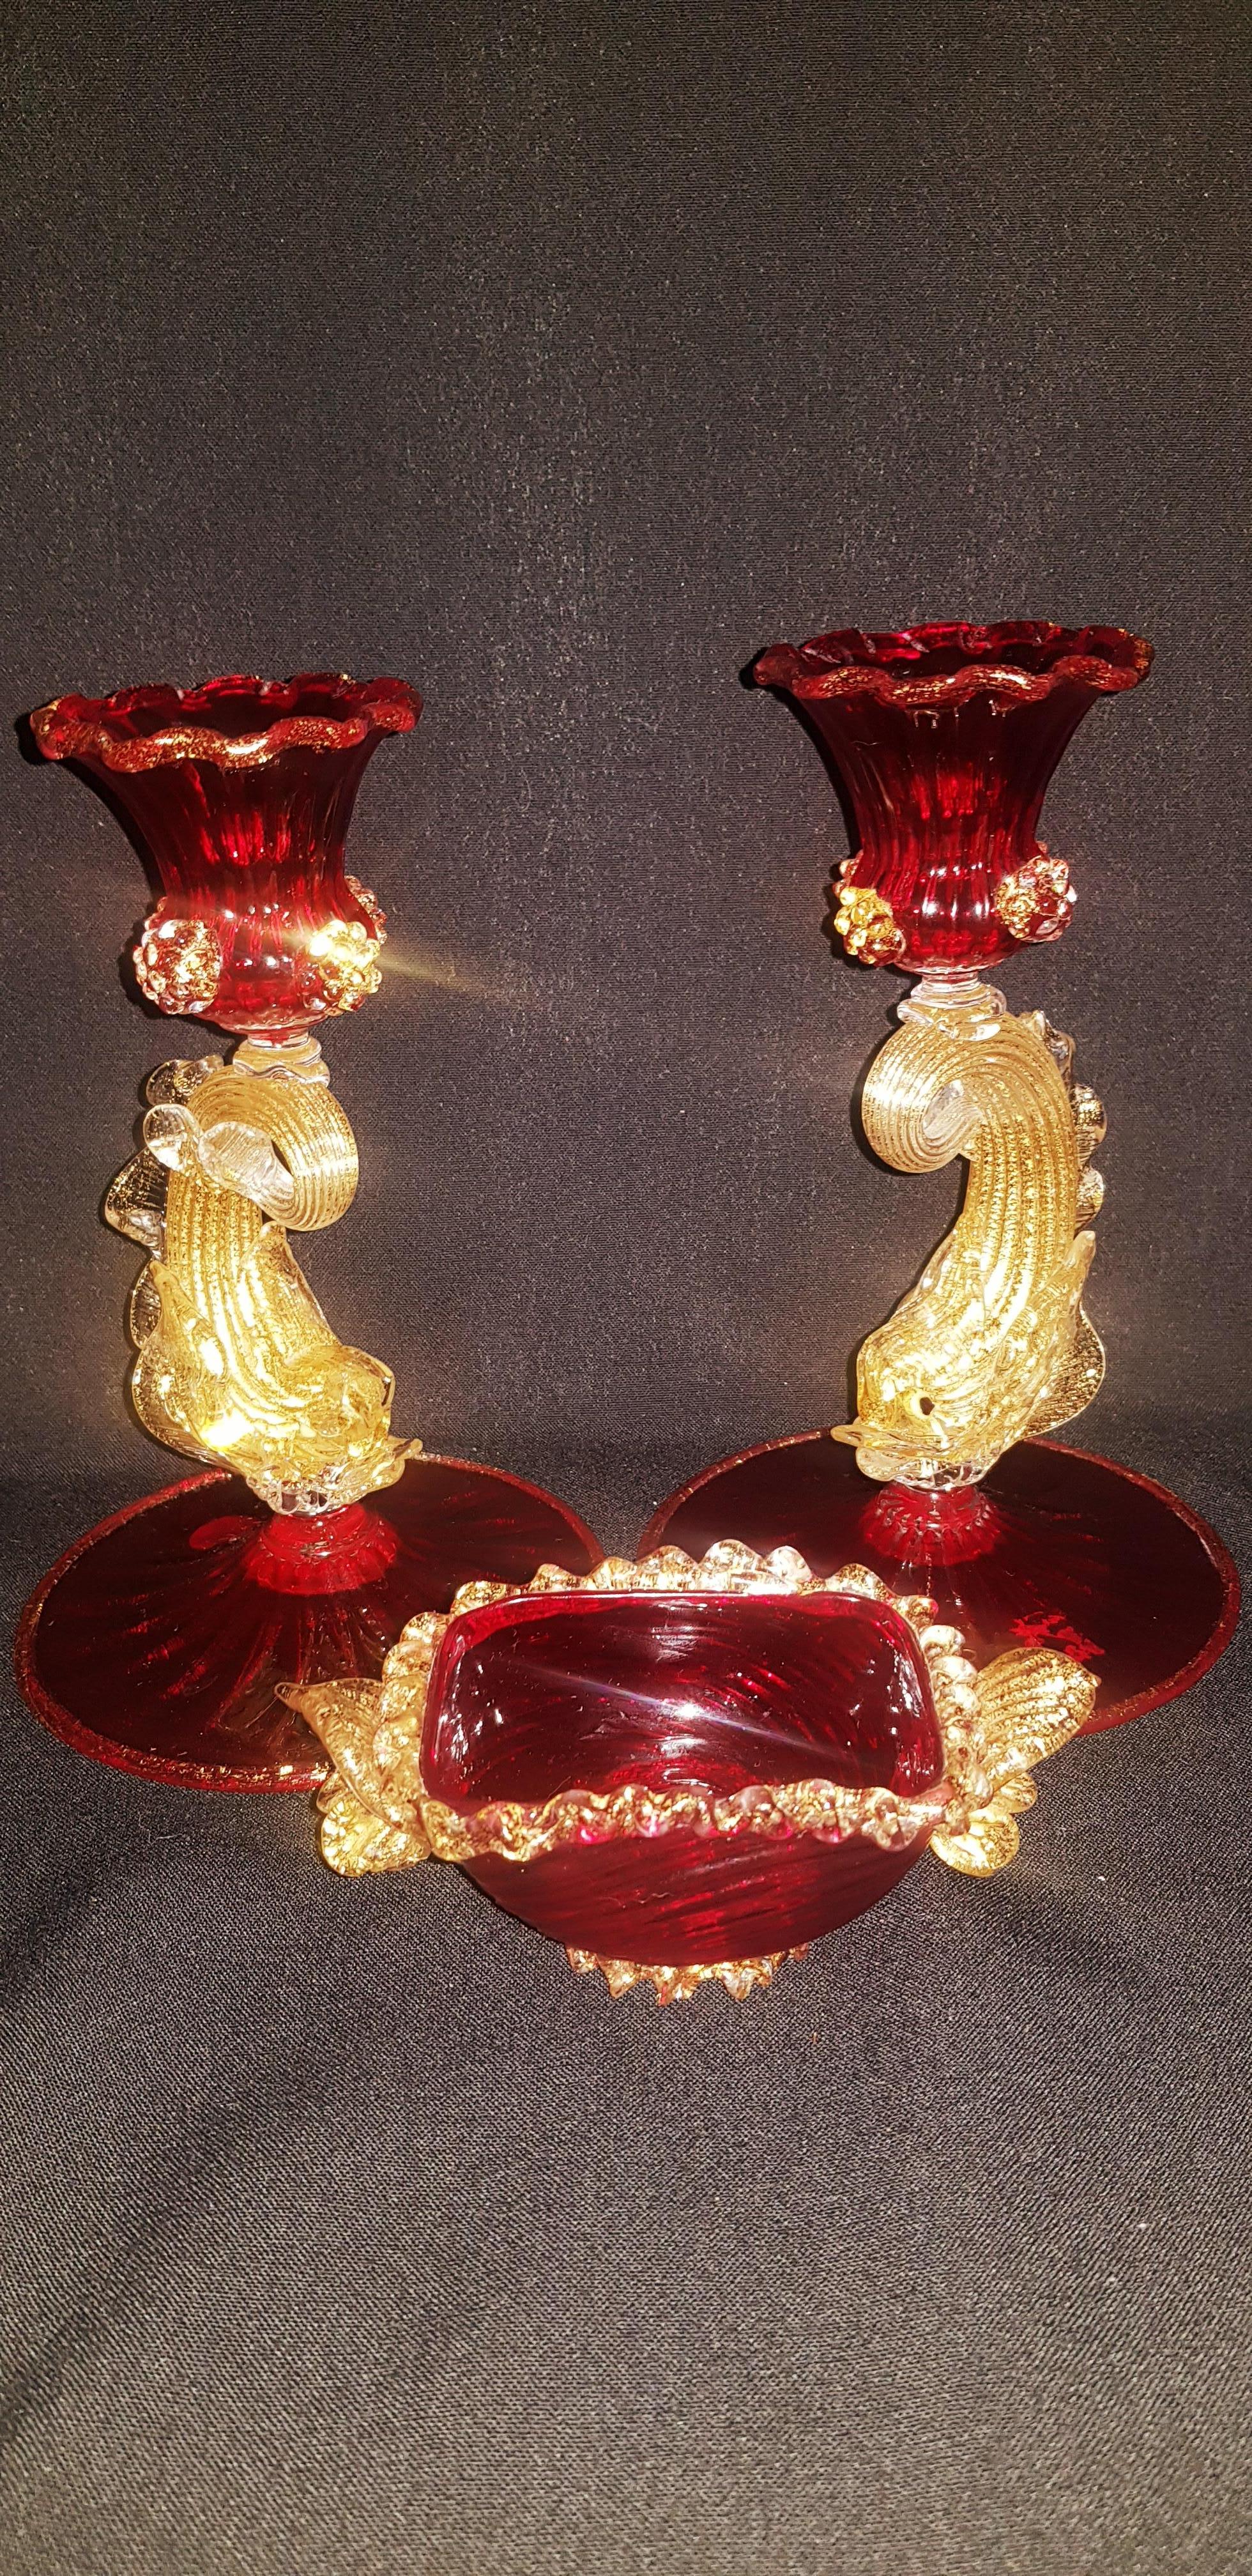 Vitange murano glass set, two candle stick red and gold leaf and bowl with gold leaf, labelled Barovier and Toso, brilliant condition.